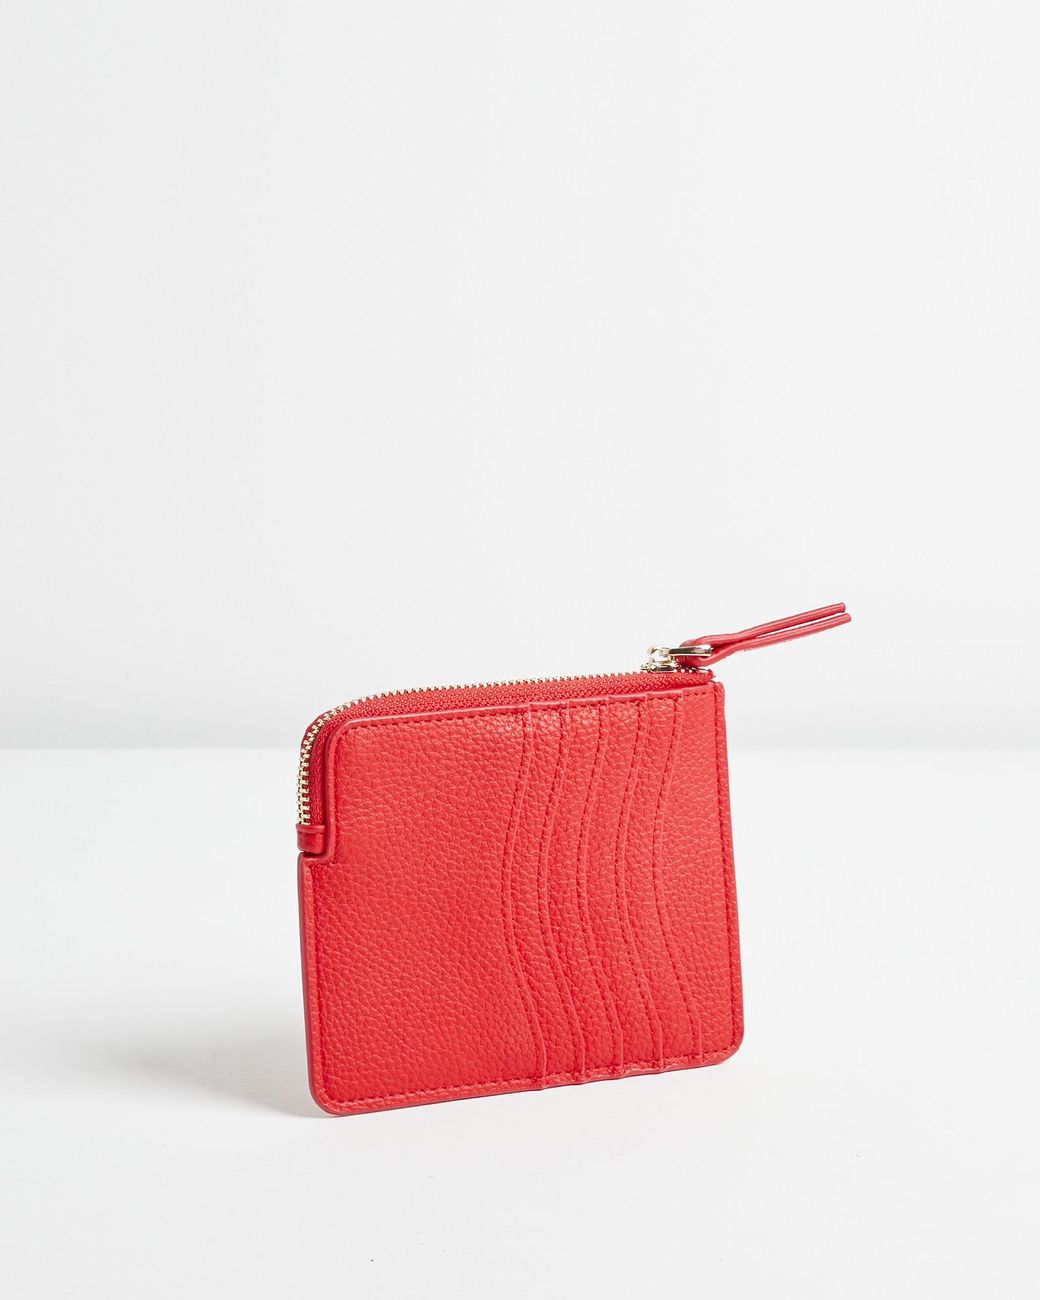 Oliver Bonas Rinnie Red Zipped Card Holder - Lyst